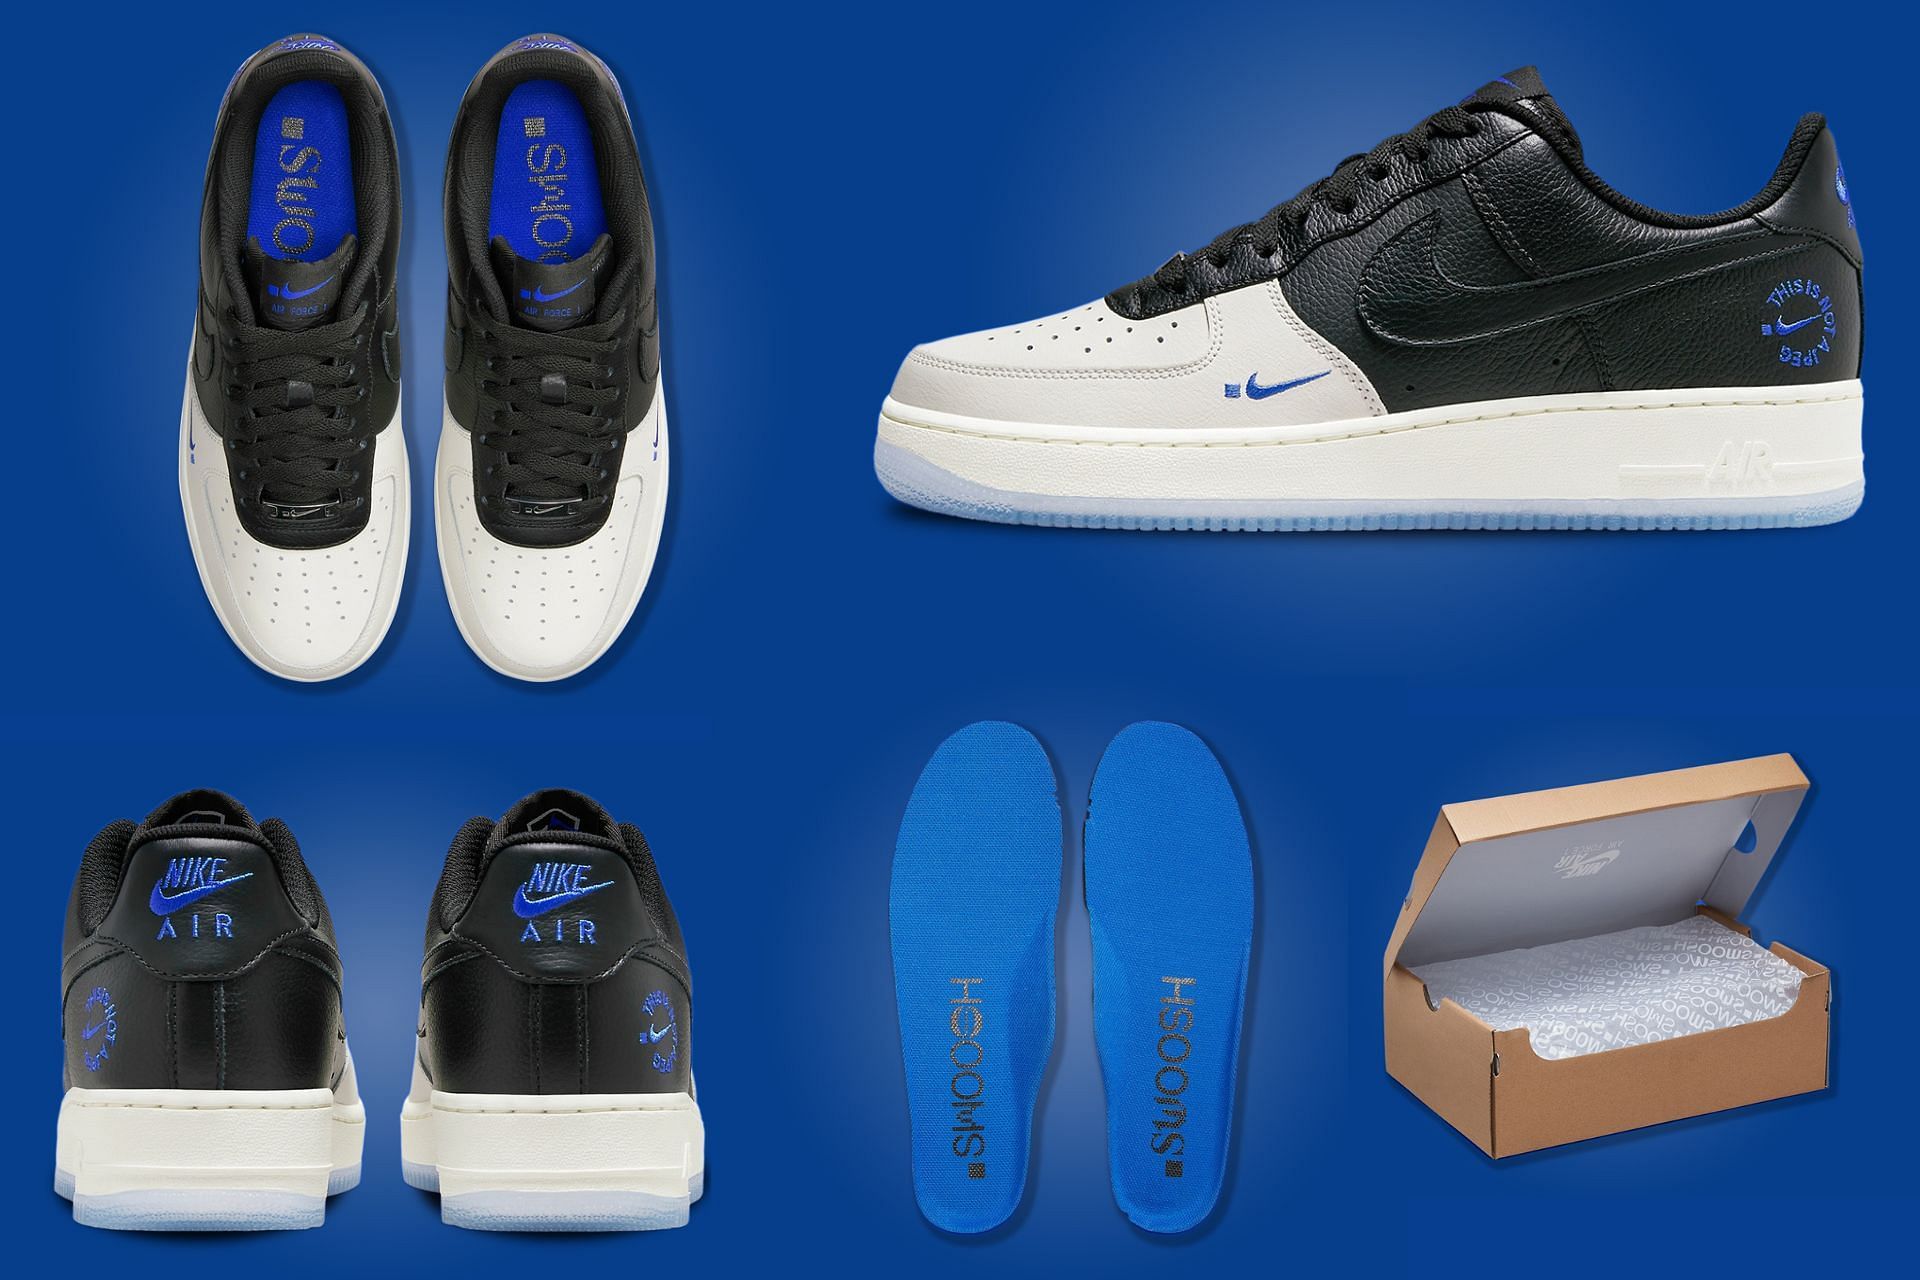 Here's a detailed look at the upcoming Air Force 1 Low colorway (Image via Sportskeeda)